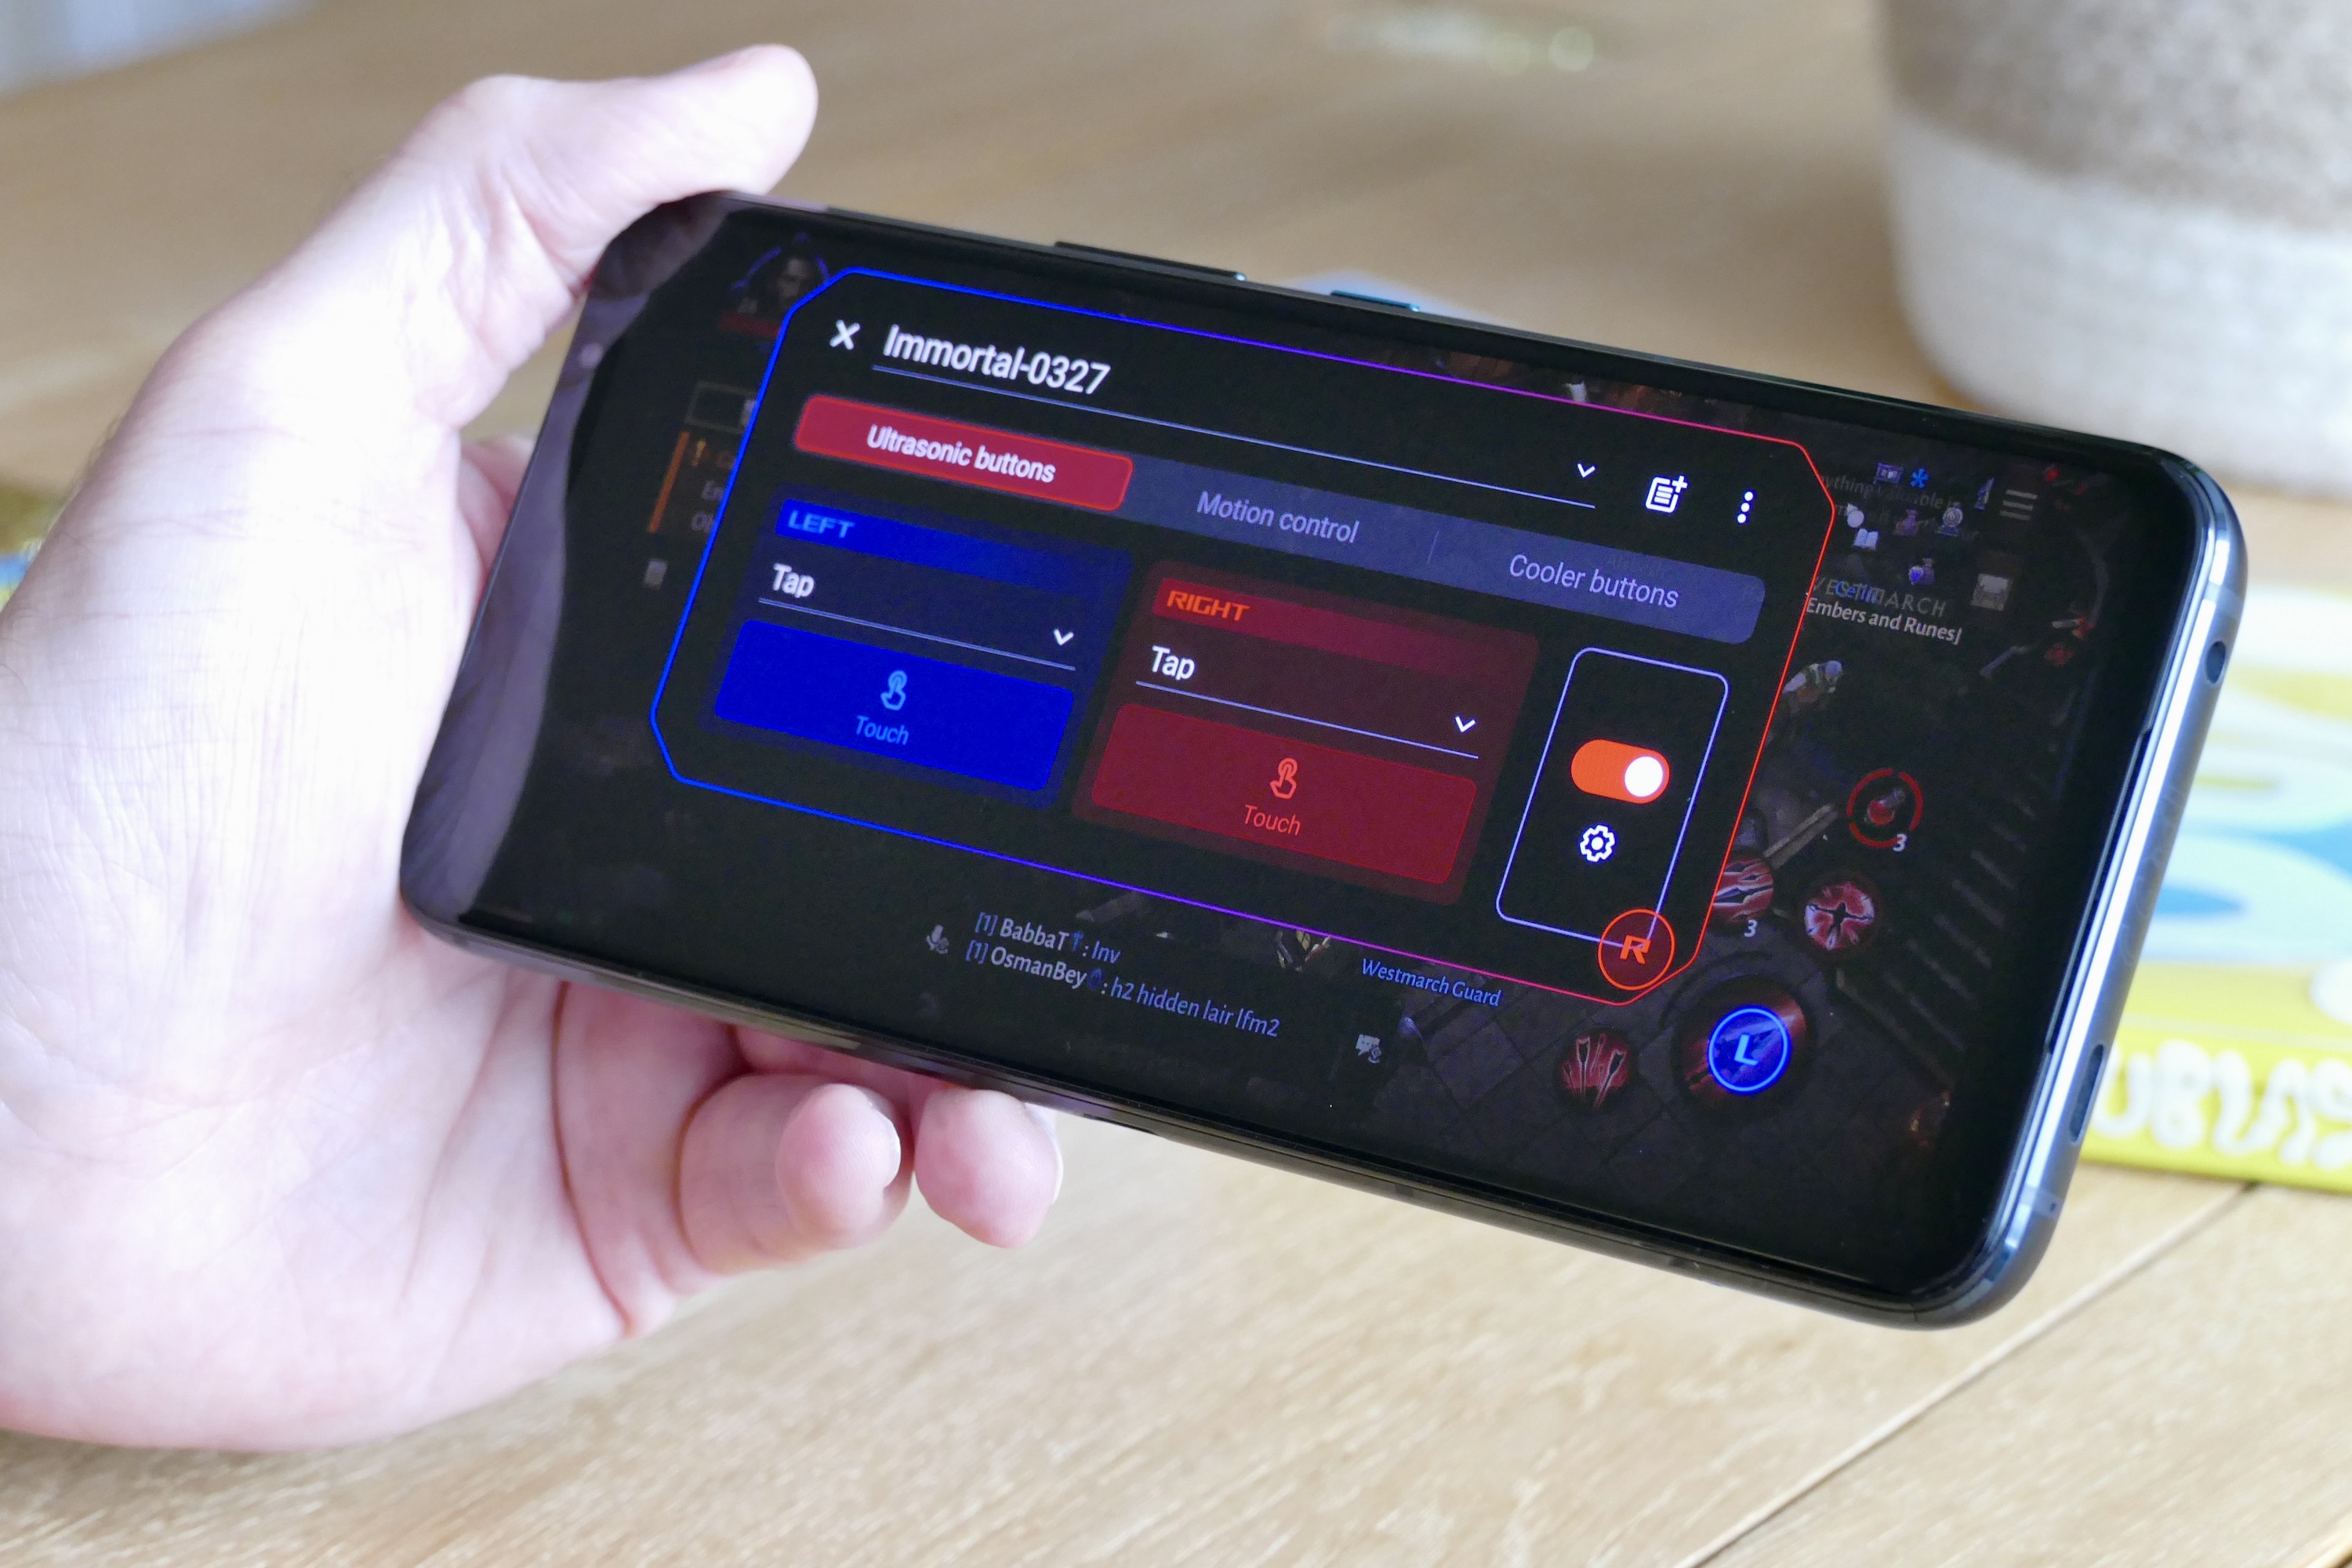 Ultrasonic shoulder button settings on the Asus ROG Phone 6 Pro.